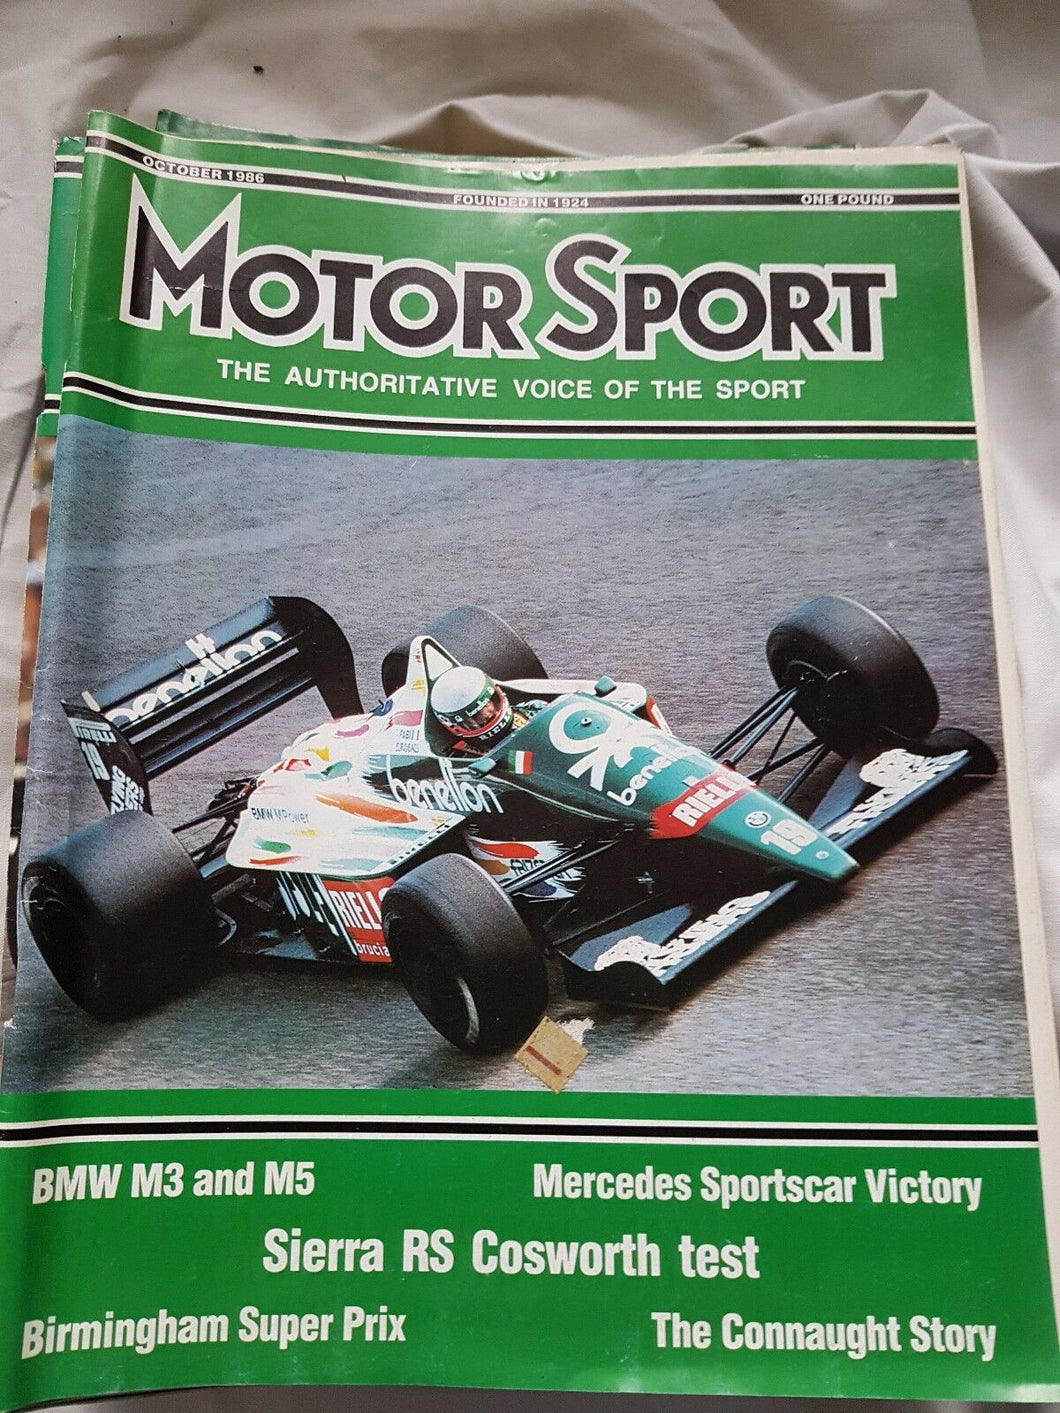 Motorsport October 1986 please see second image for contents